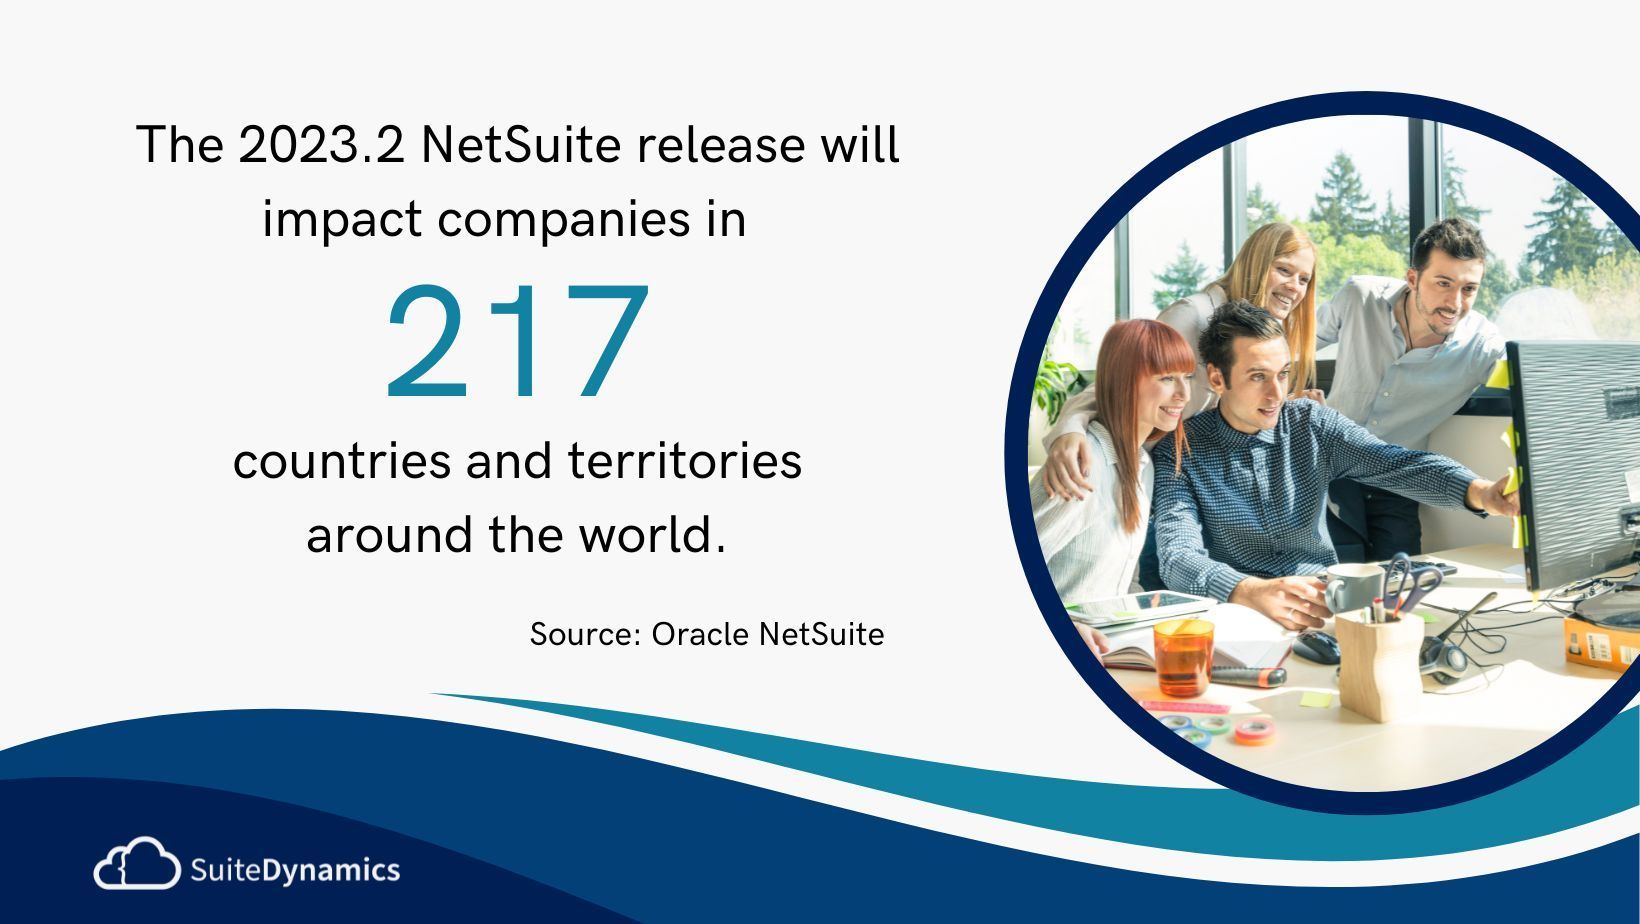 Graphic stating that the 2023.2 NetSuite upgrade will impact companies in more than 217 countries.